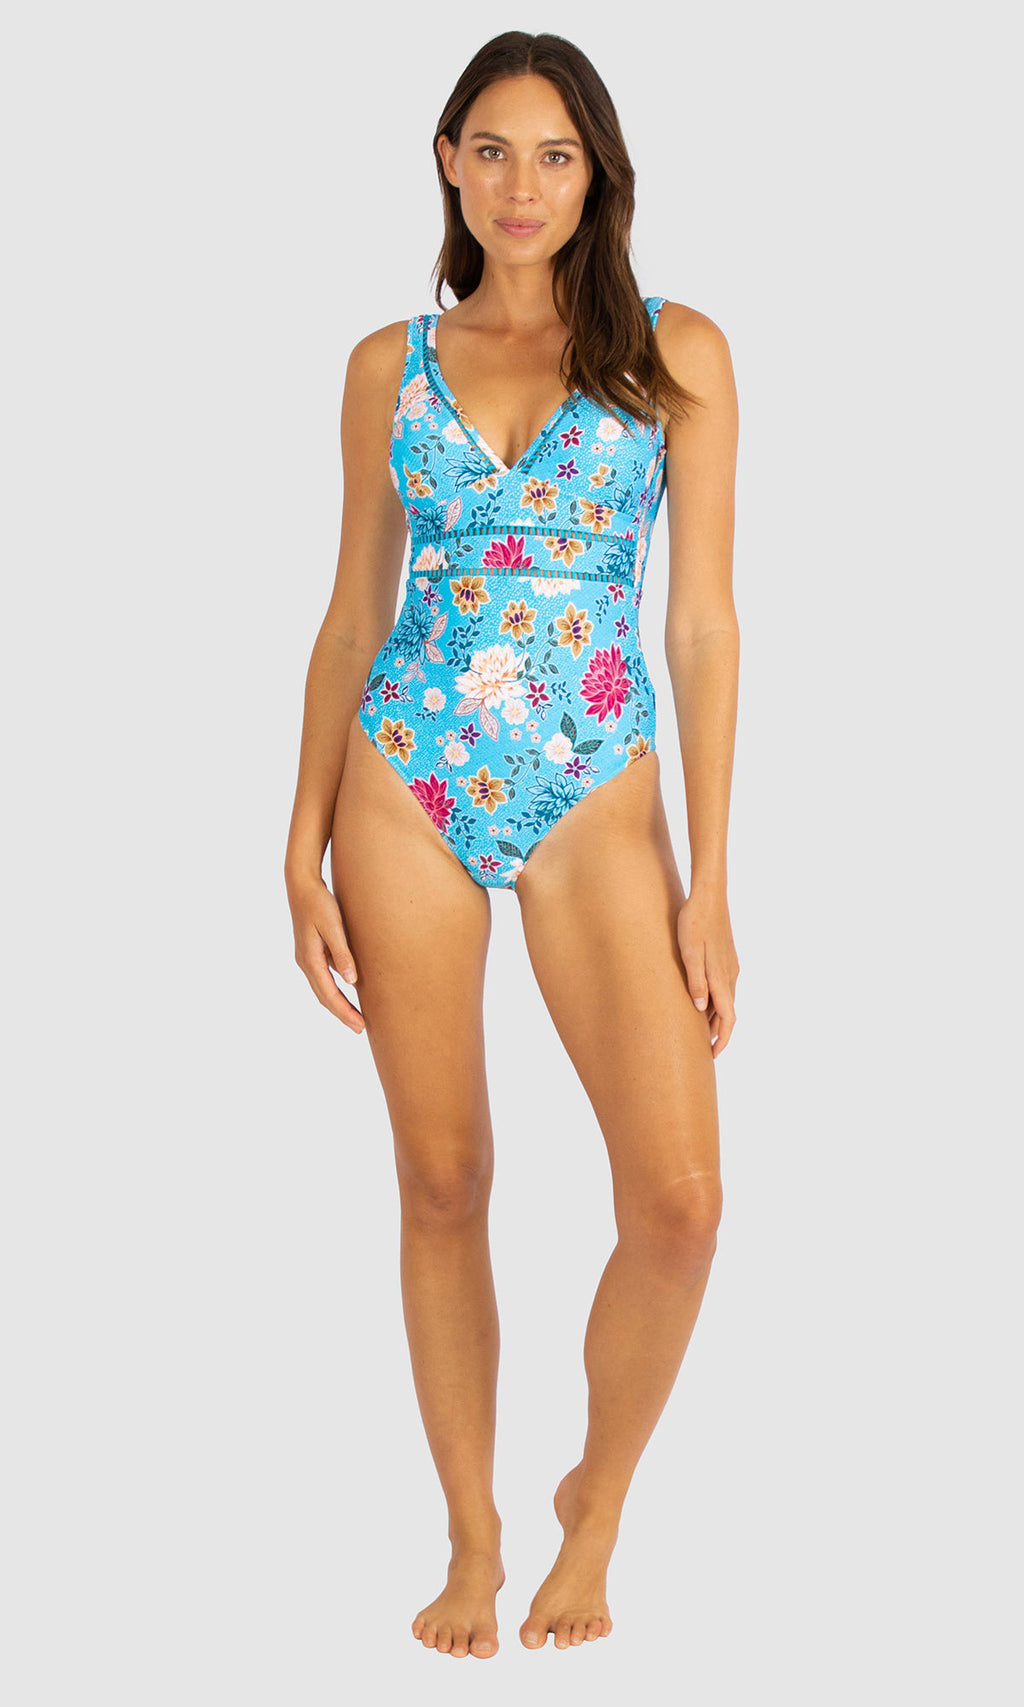 Pebble Beach Long Line One Piece Swimsuit, Fits A Cup to C Cup